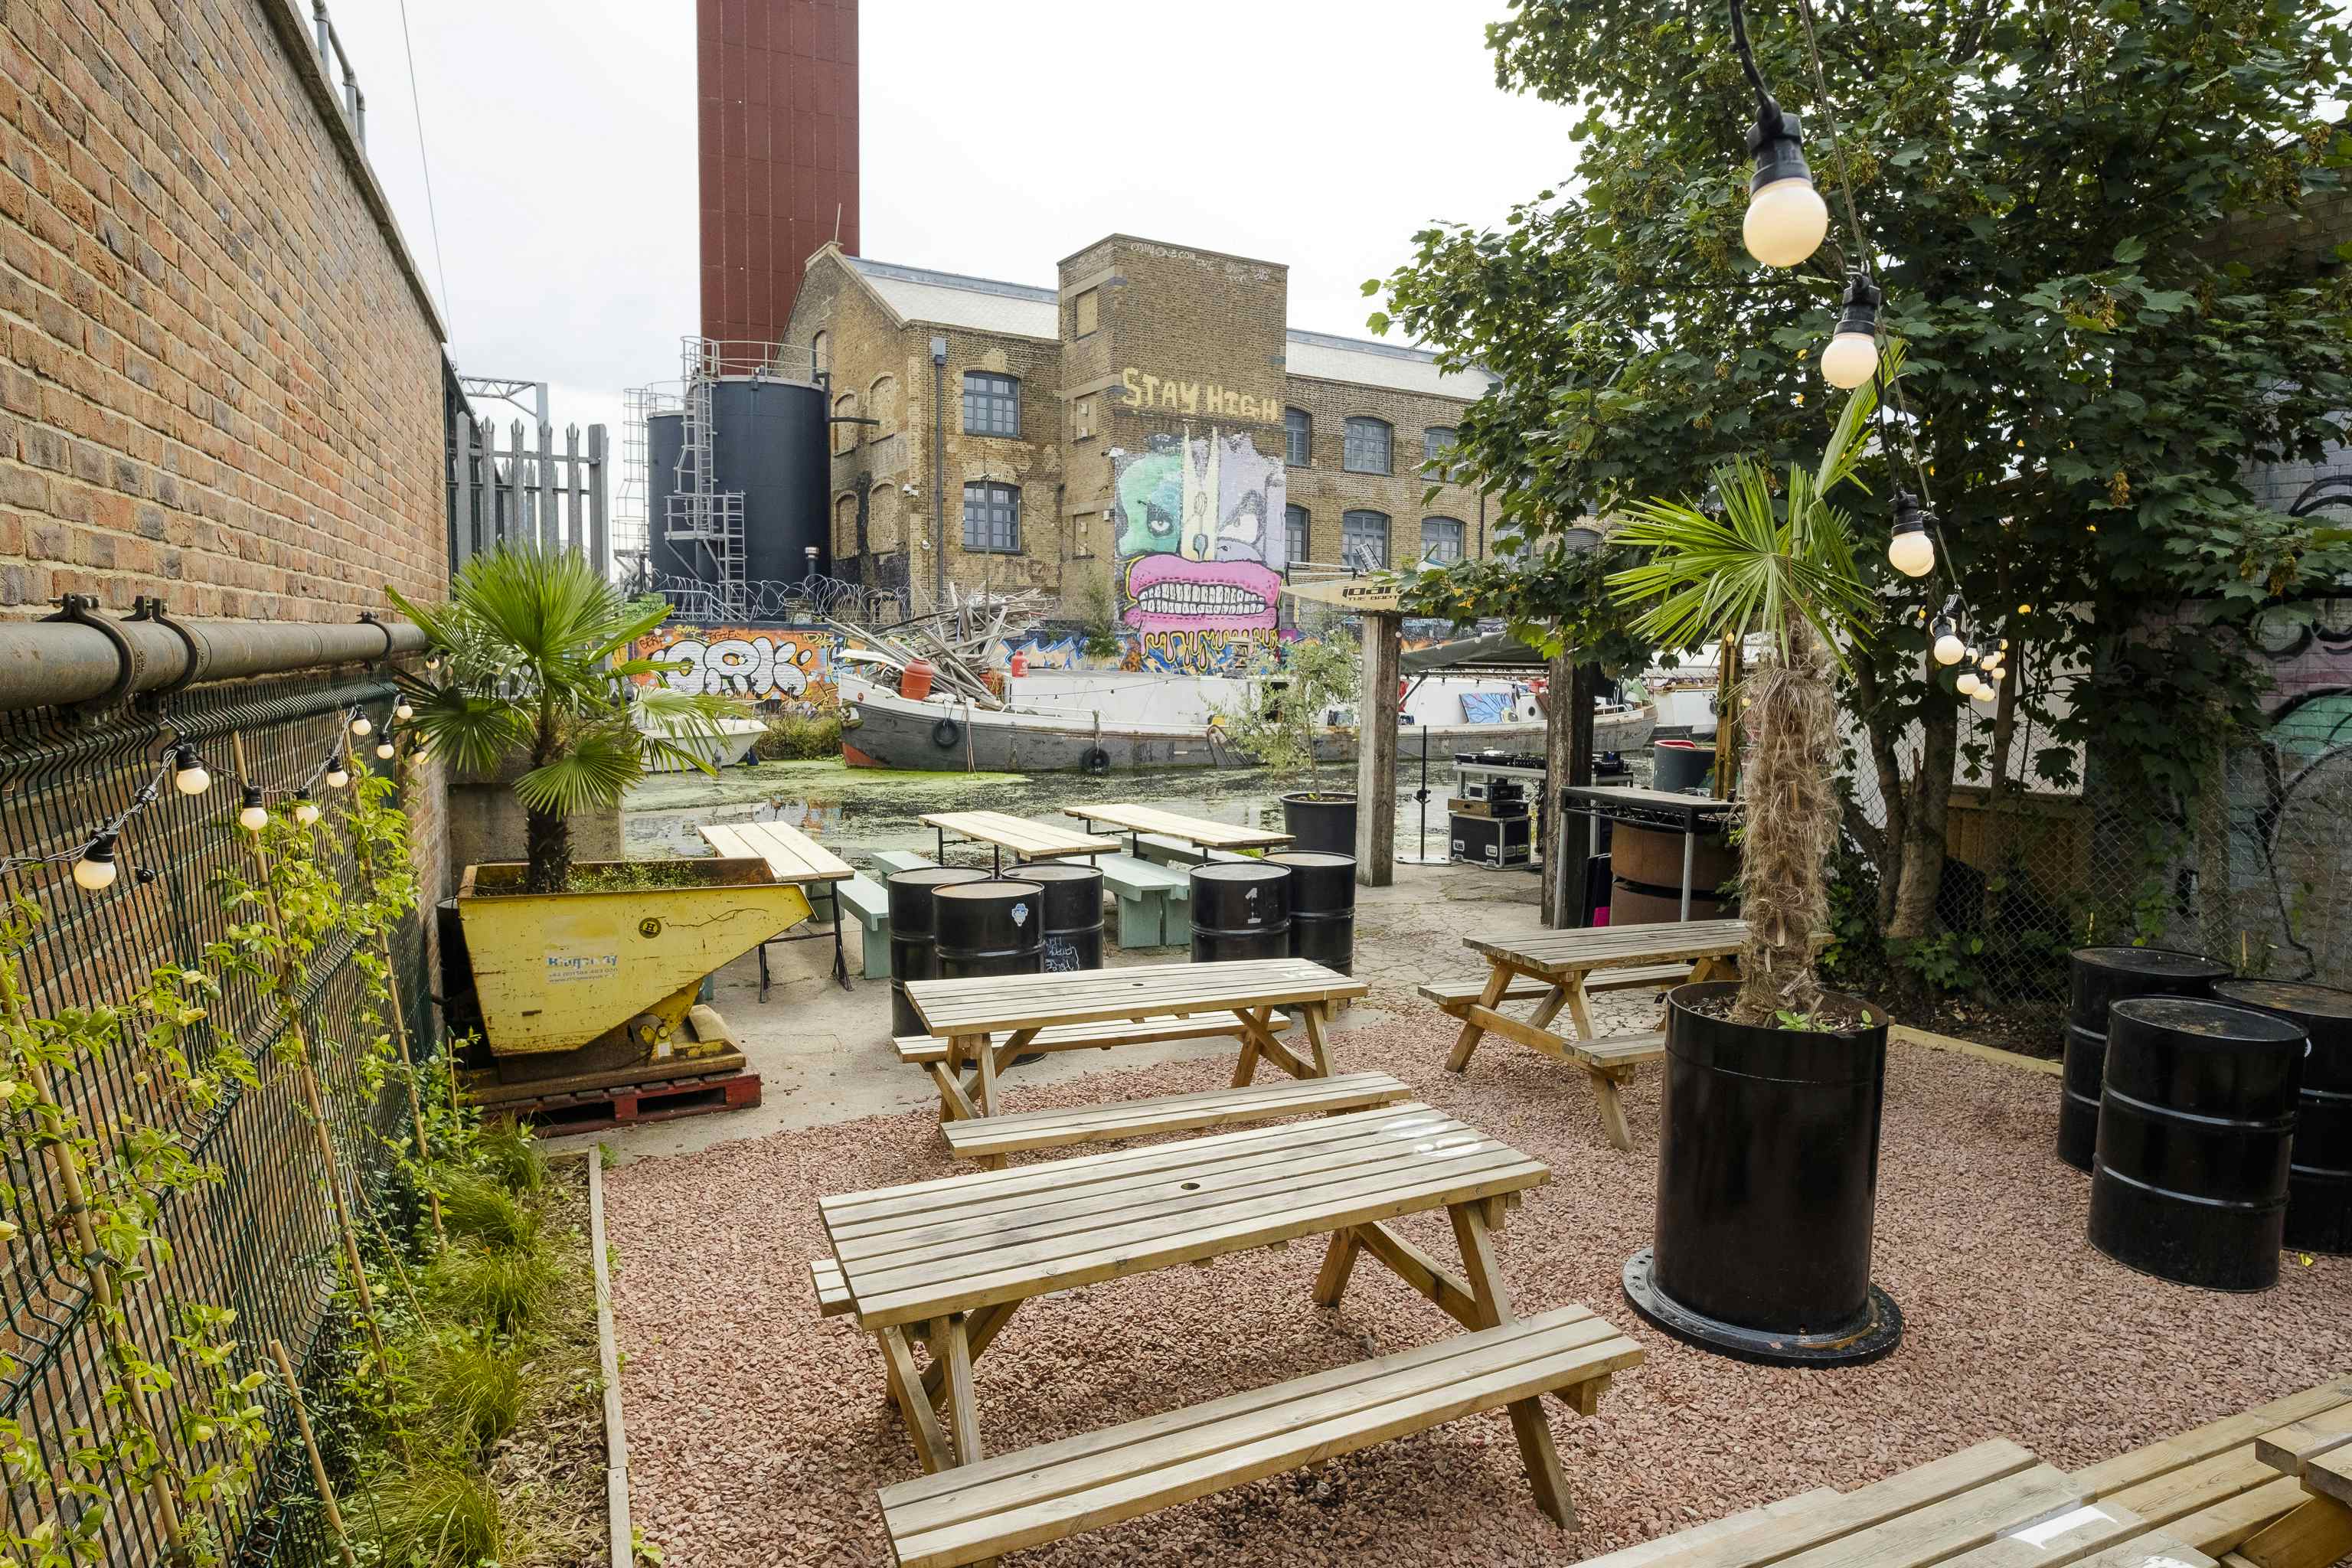 The Garden Space, CRATE Brewery & Pizzeria